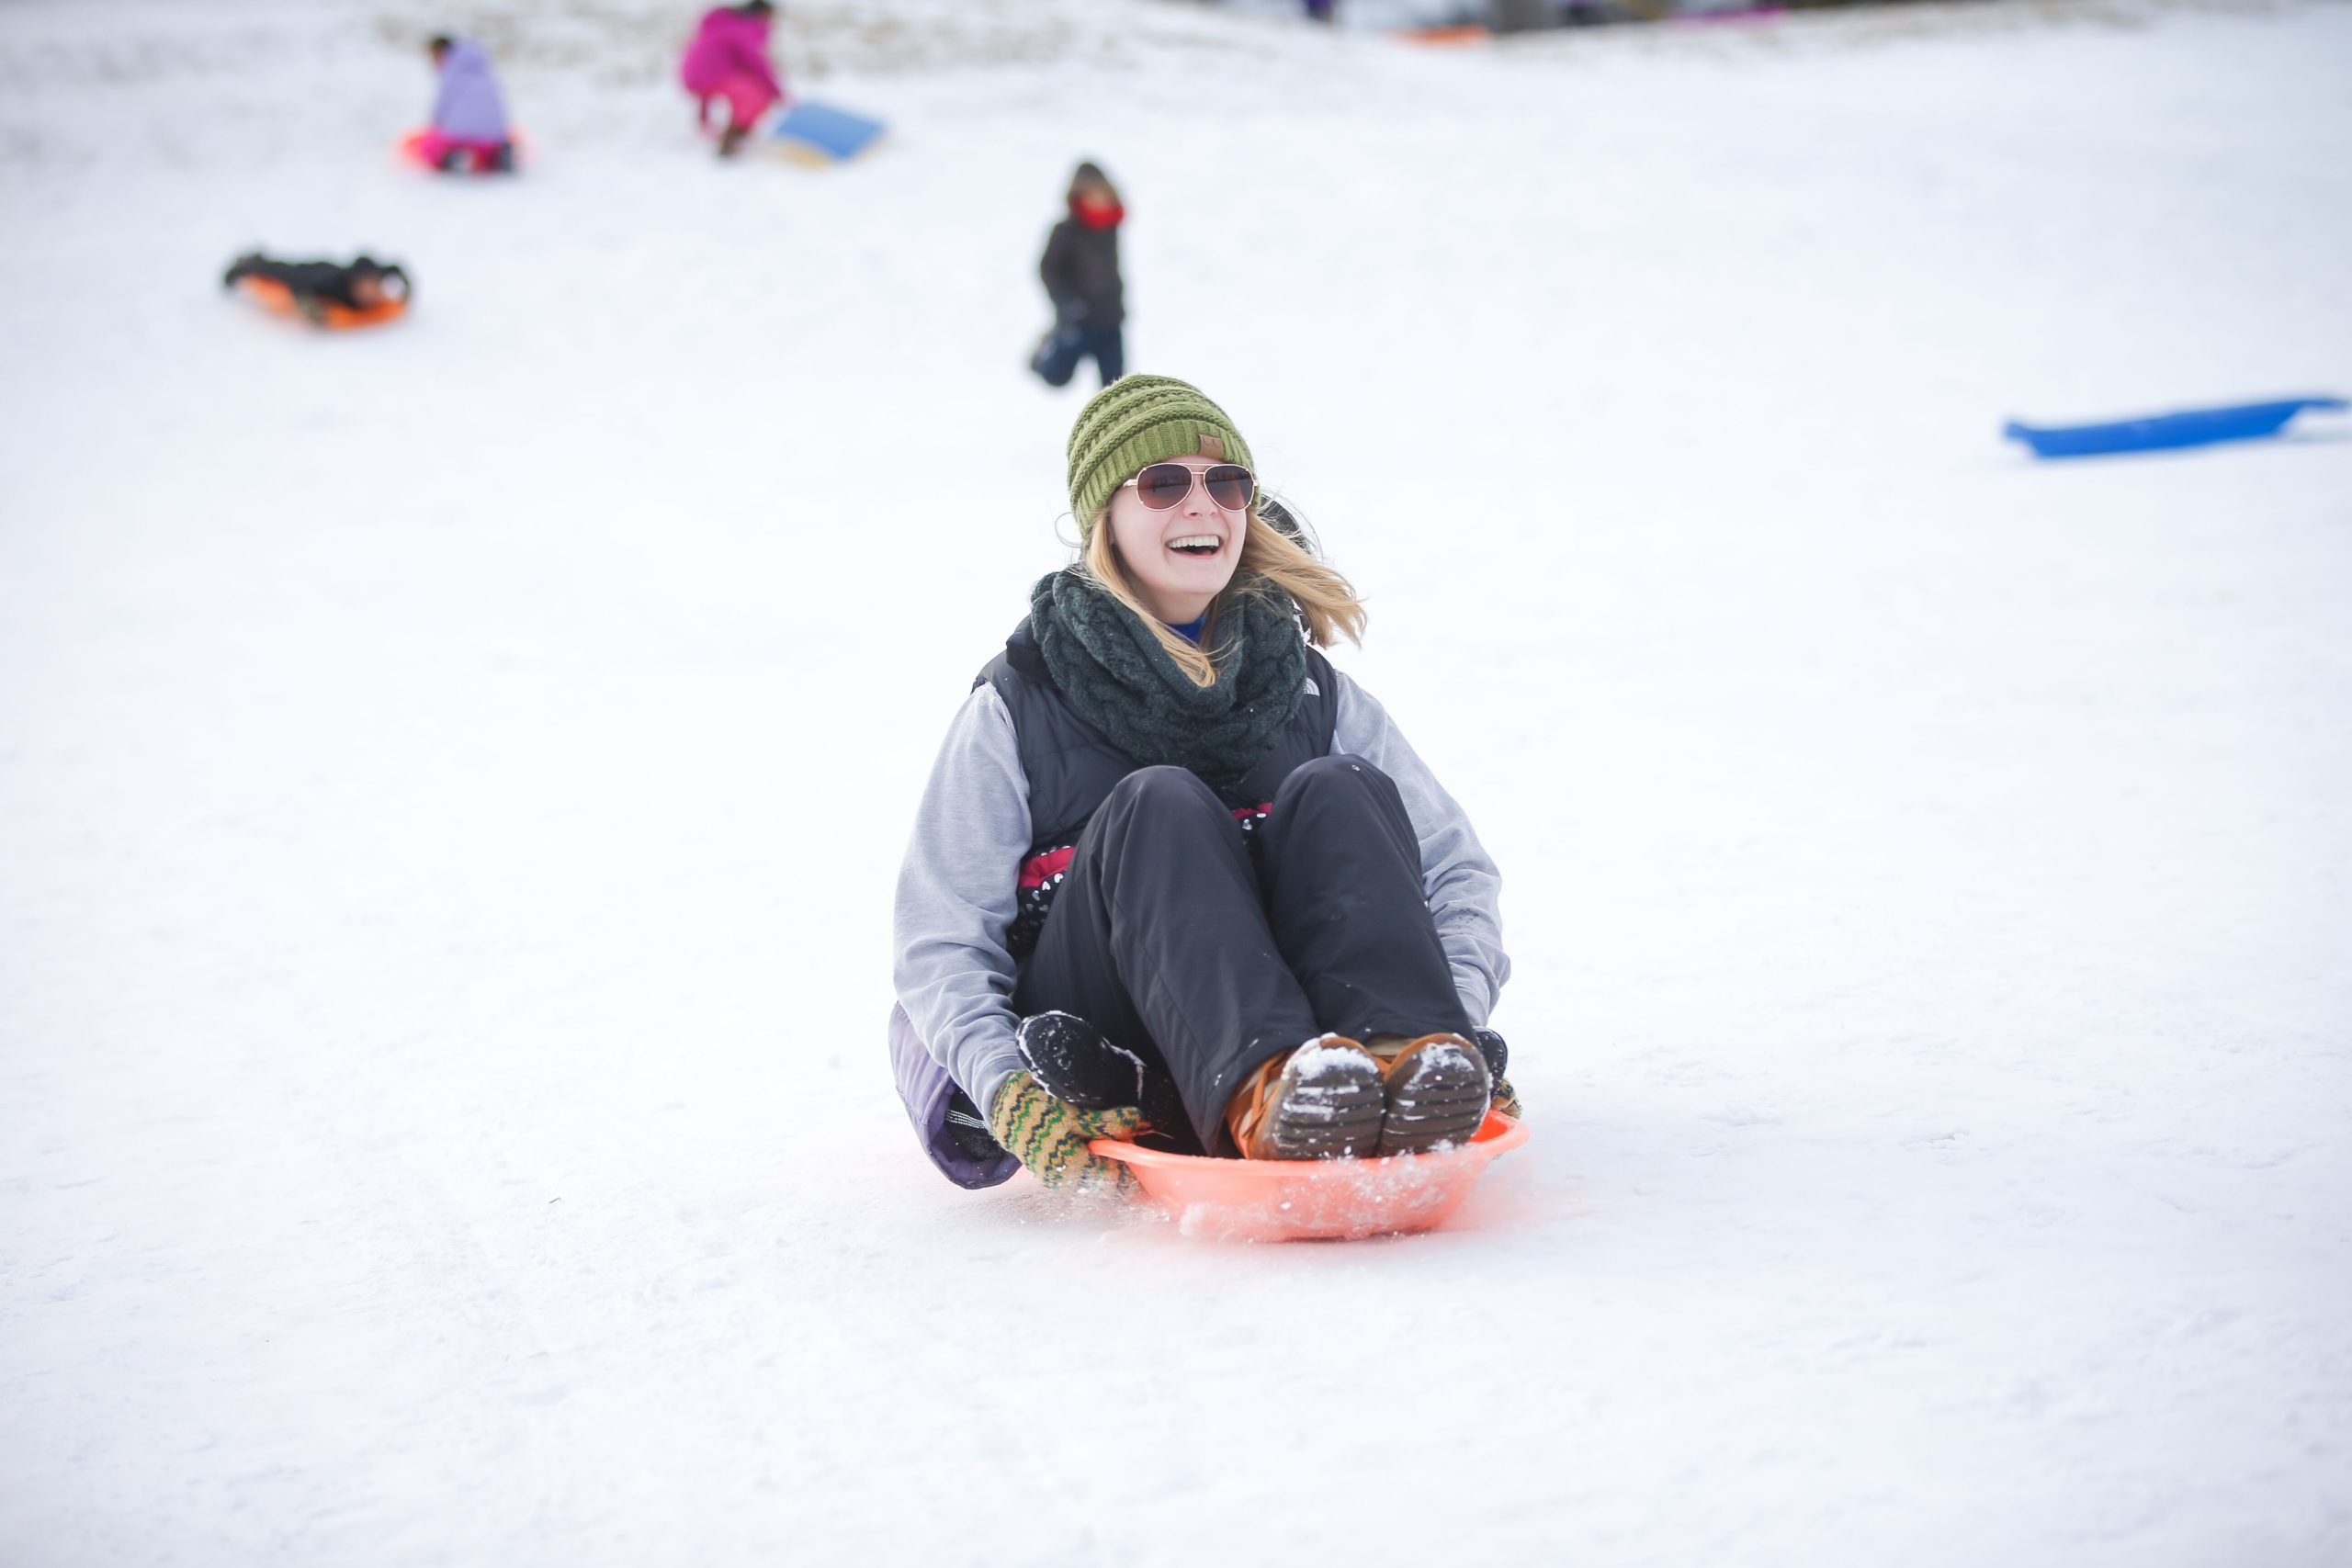 A young girl tubes down a snowy slope in Grand Forks